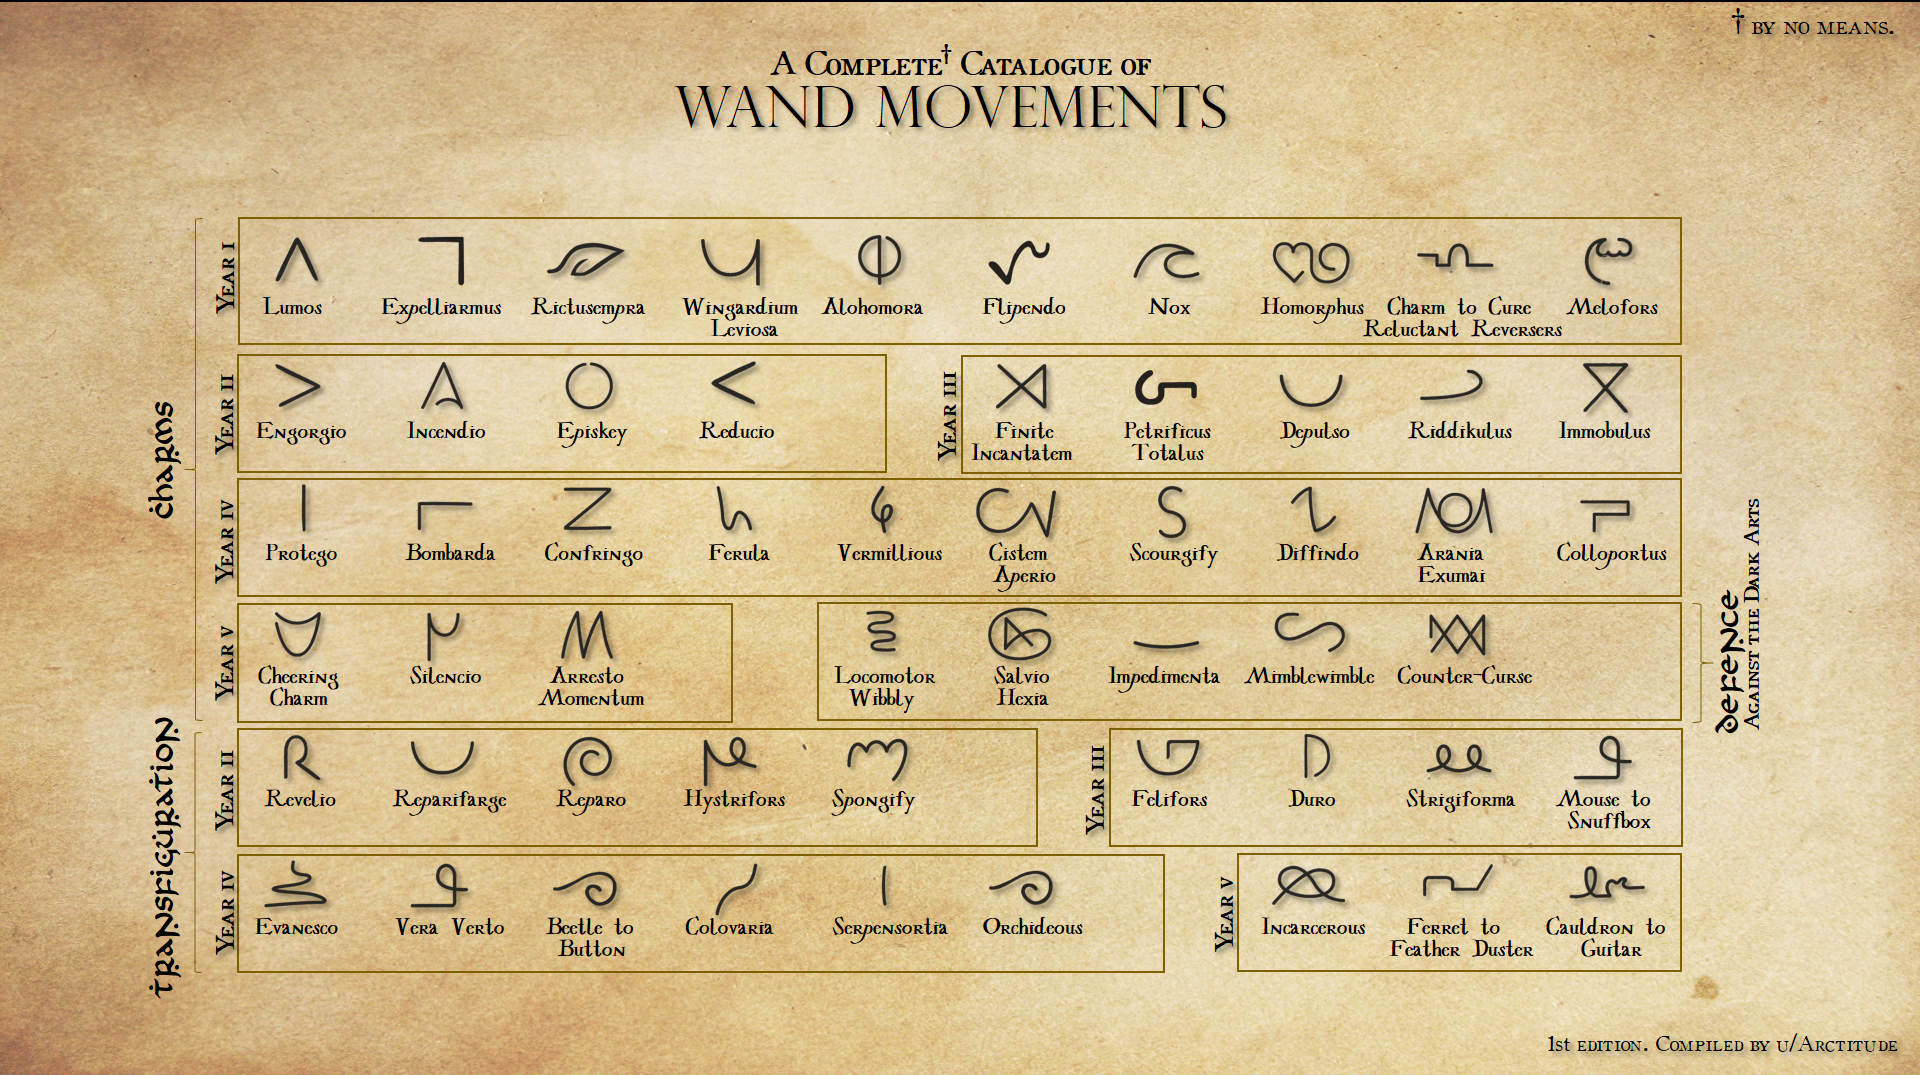 How were the spells and wand movements created in the Harry Potter movies?